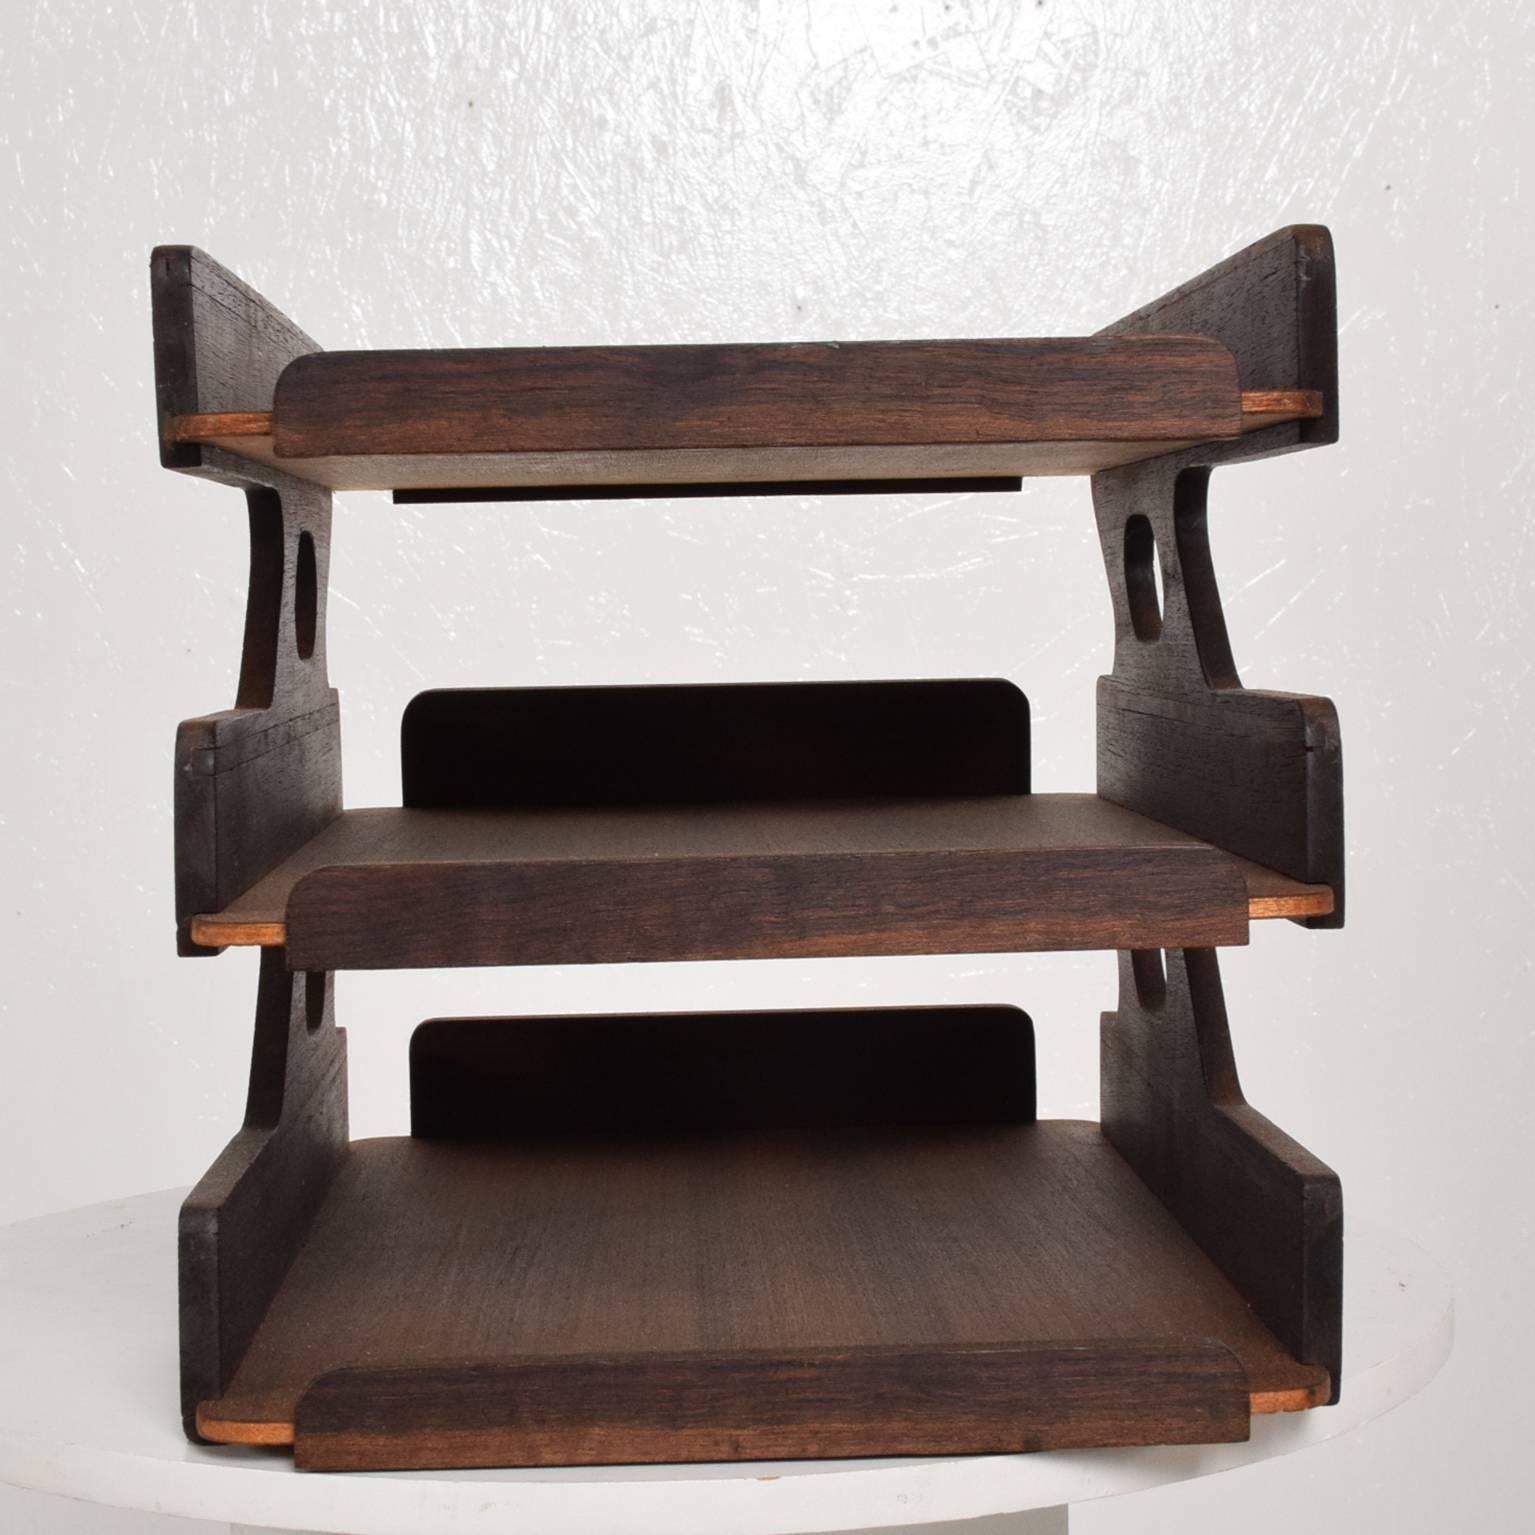 Miid-Century Modern Rosewood Office Tray Desk Accessory 2